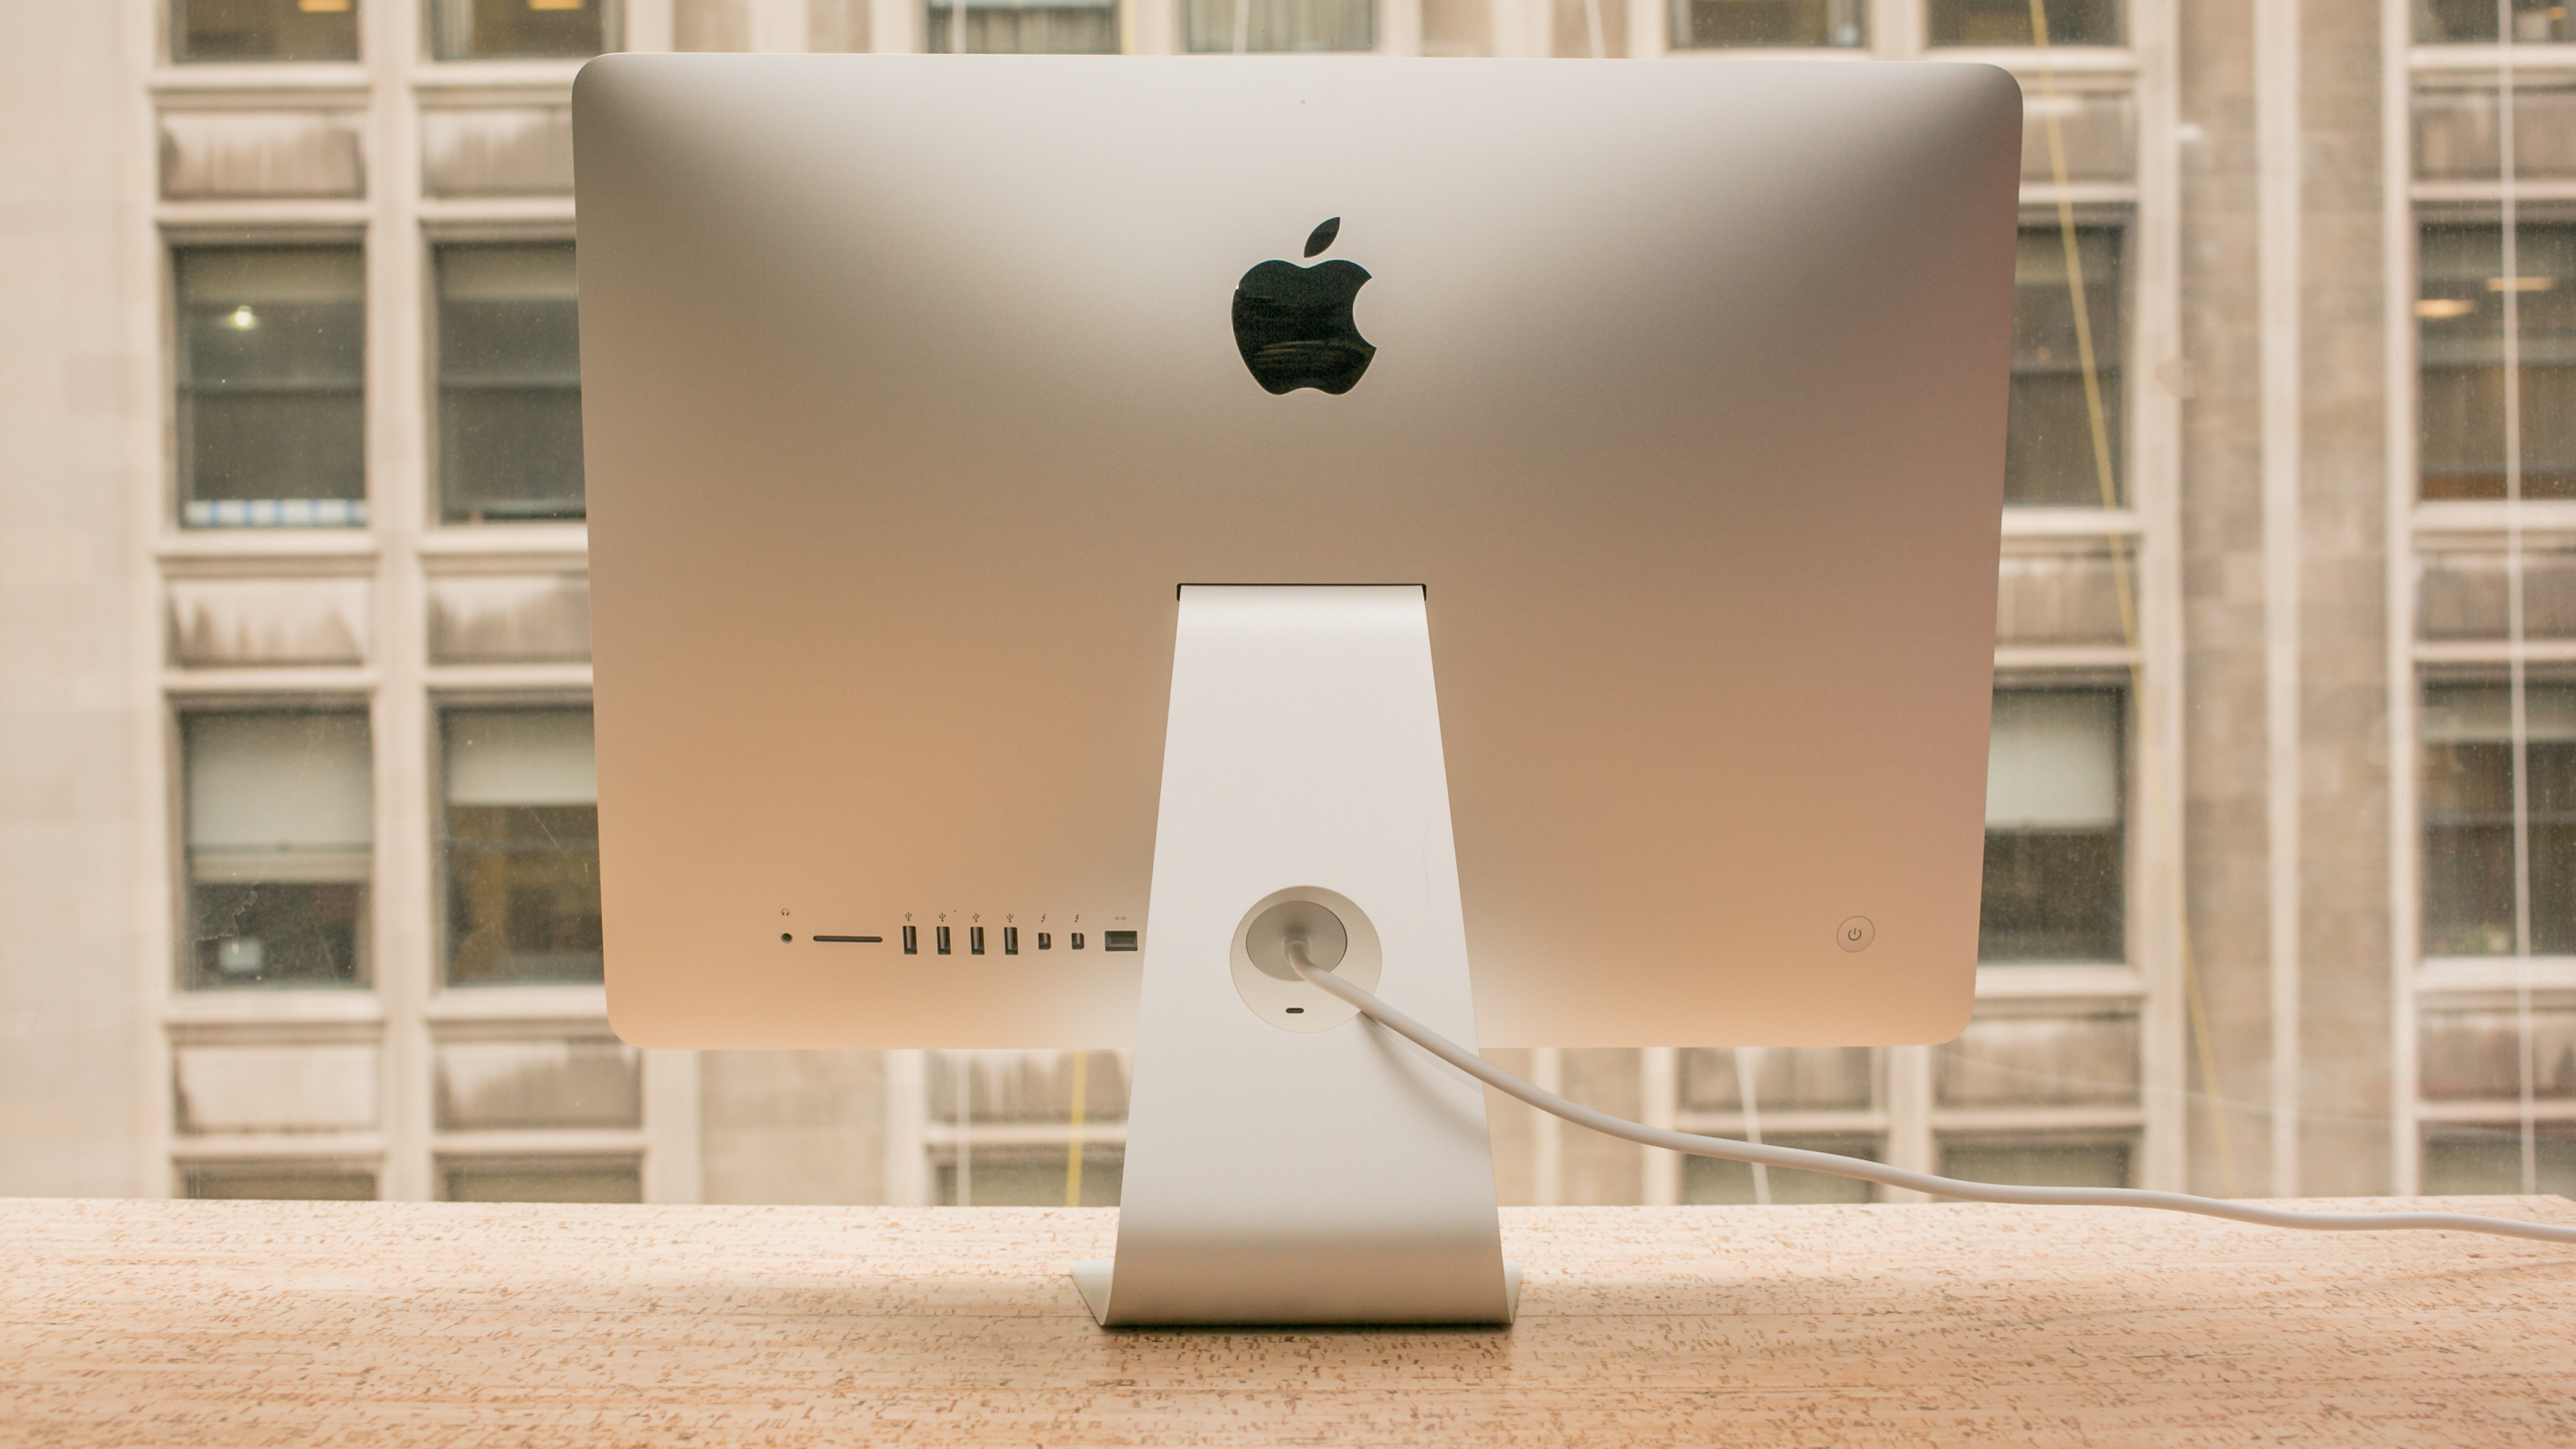 Apple iMac with 4K Retina display (21.5-inch, 2015) review: Apple 